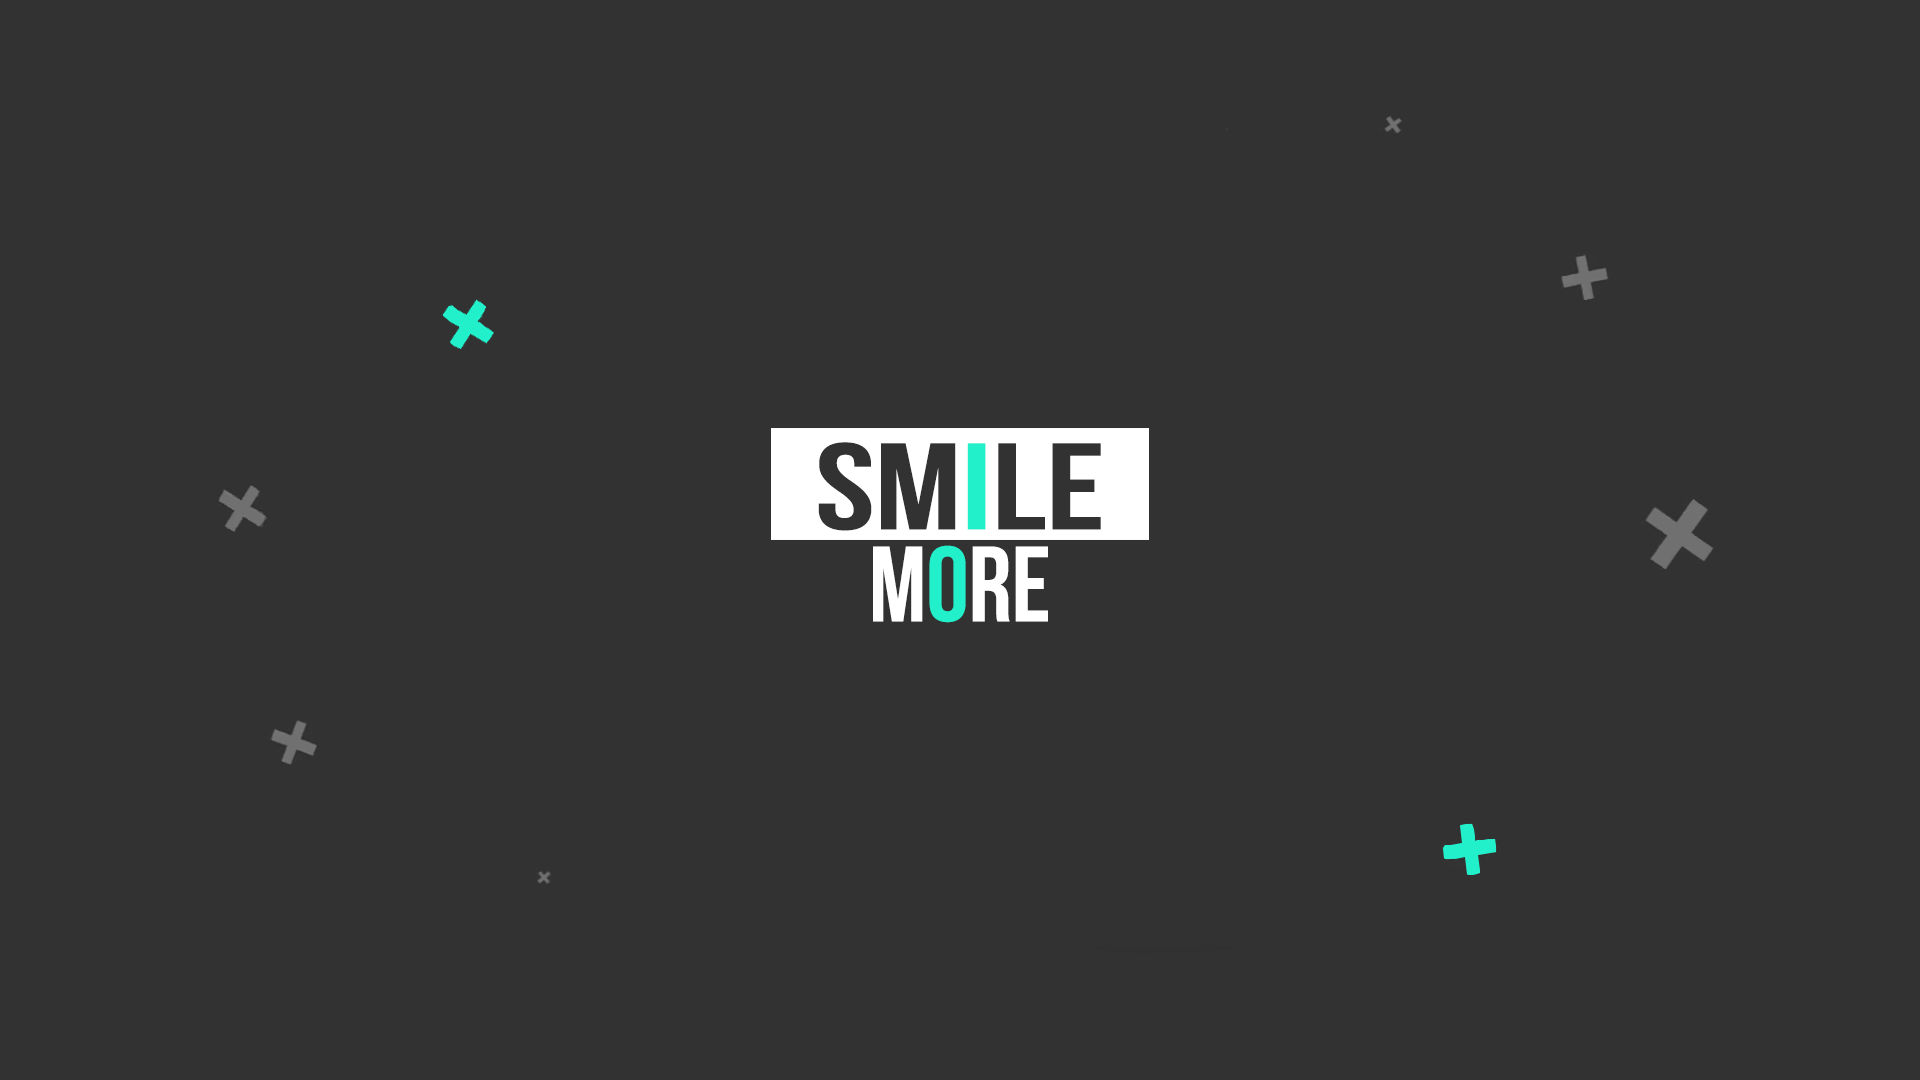 General 1920x1080 smiling happy minimalism mint solid color cyan gray background digital art text simple background